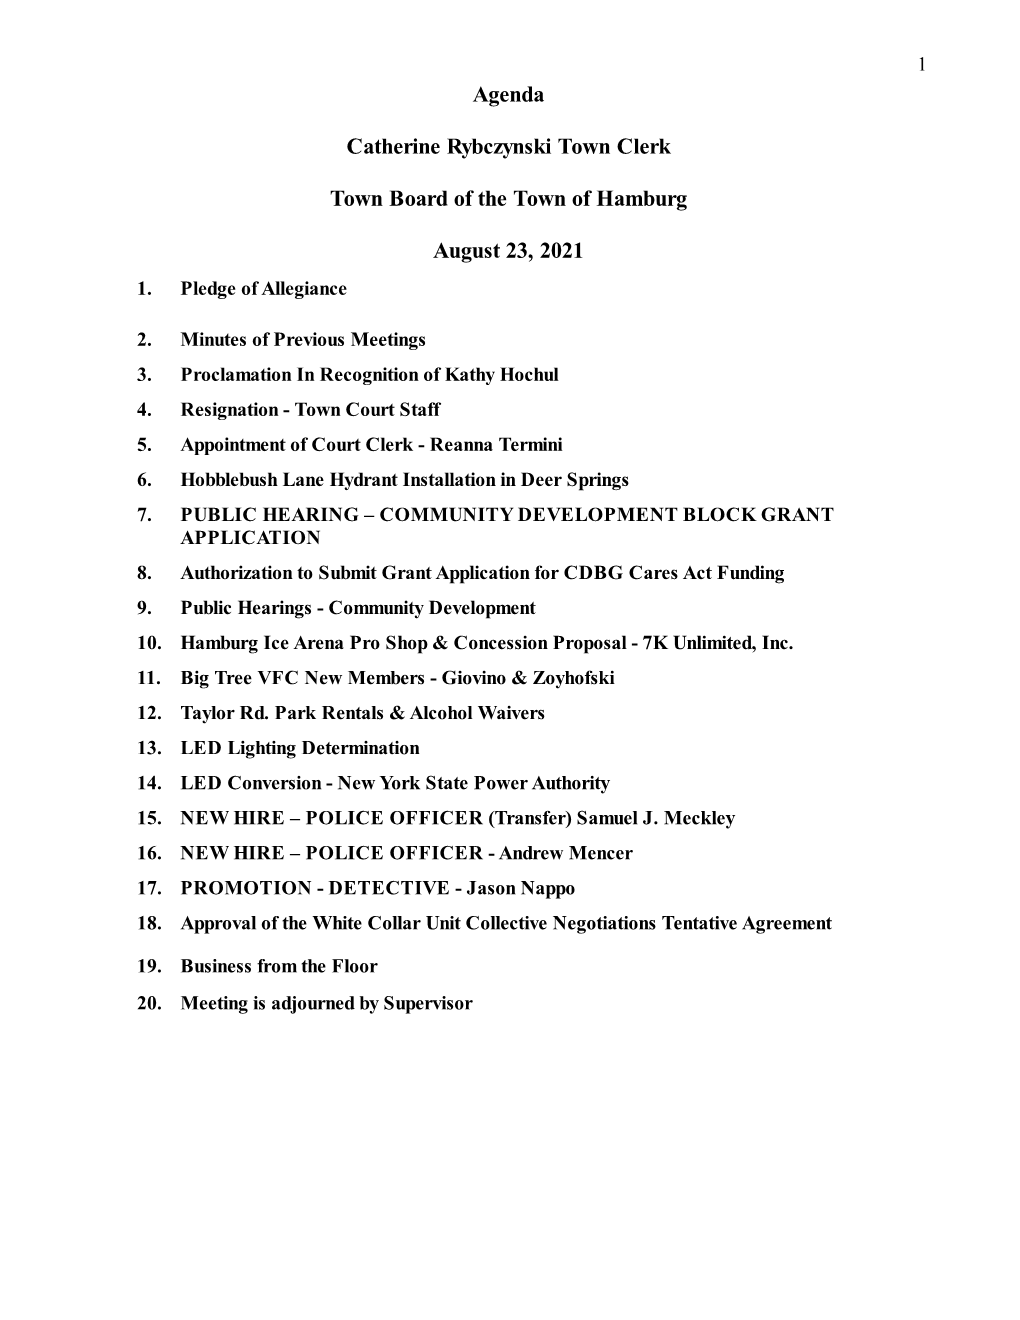 Town Board Meeting Agenda(AMENDED)